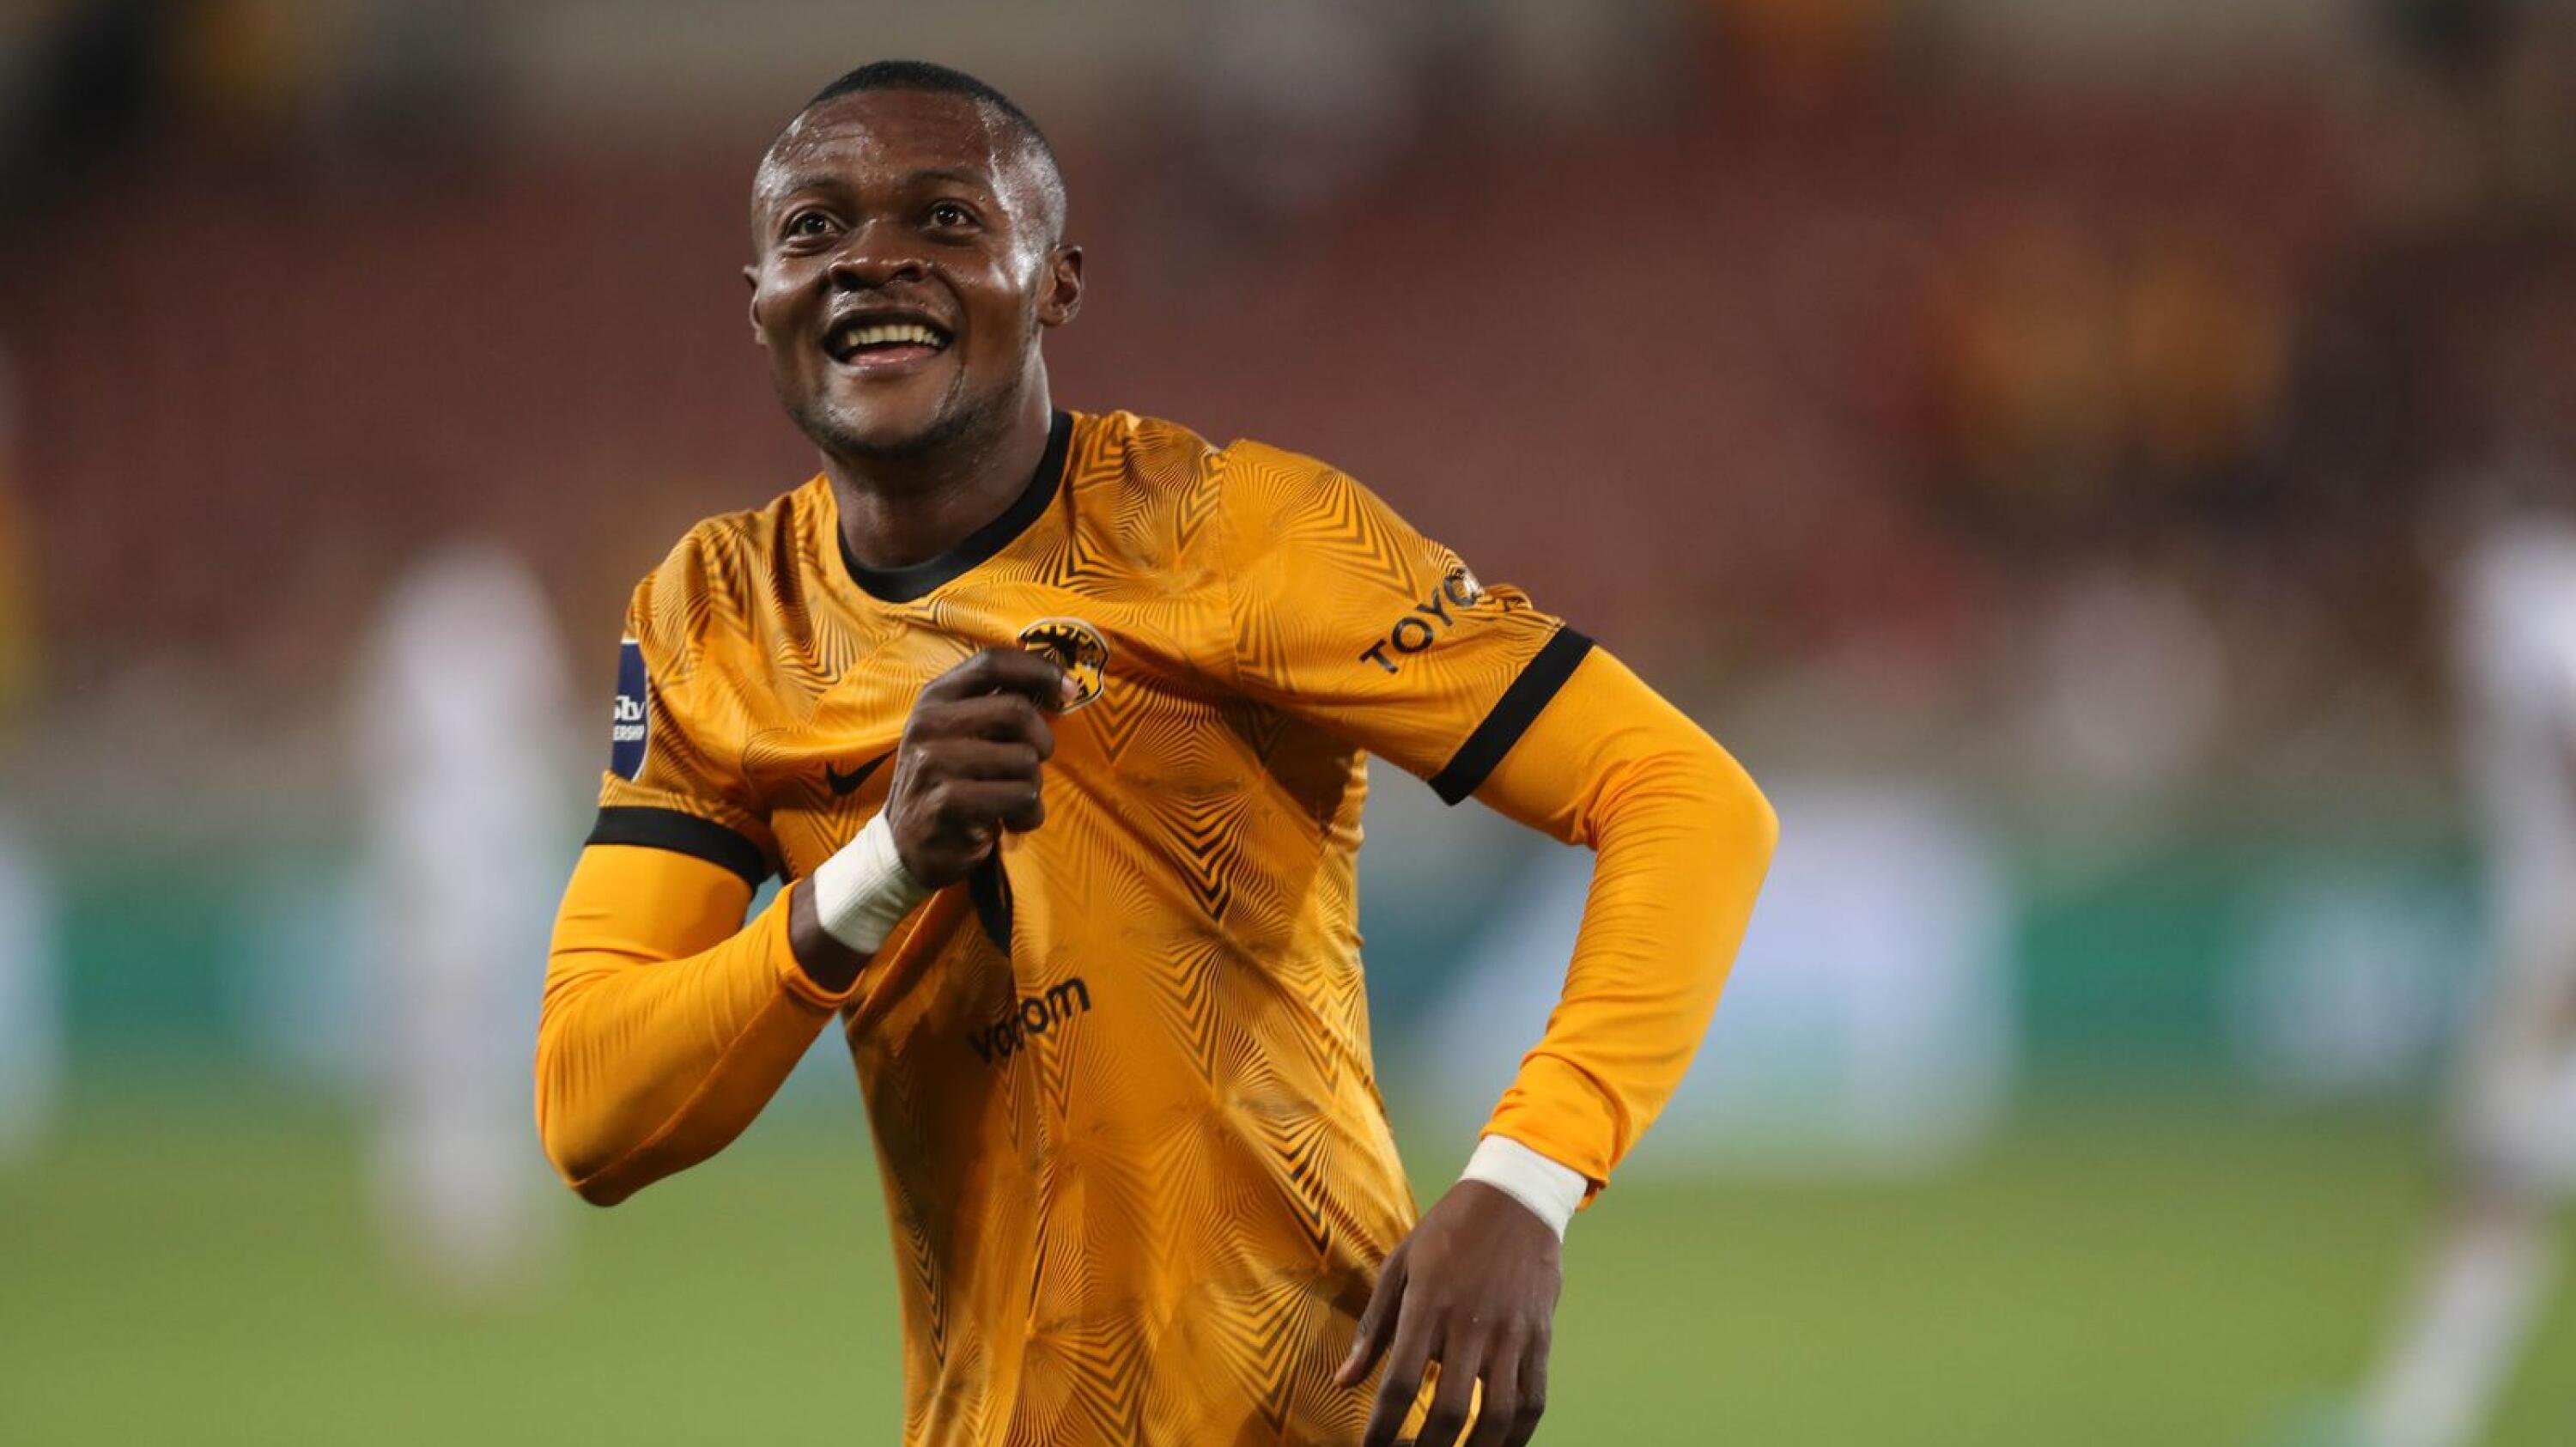 Christian Saile of Kaizer Chiefs celebrates during their DStv Premiership game against Royal AM at Peter Mokaba Stadium in Polokwane on Sunday